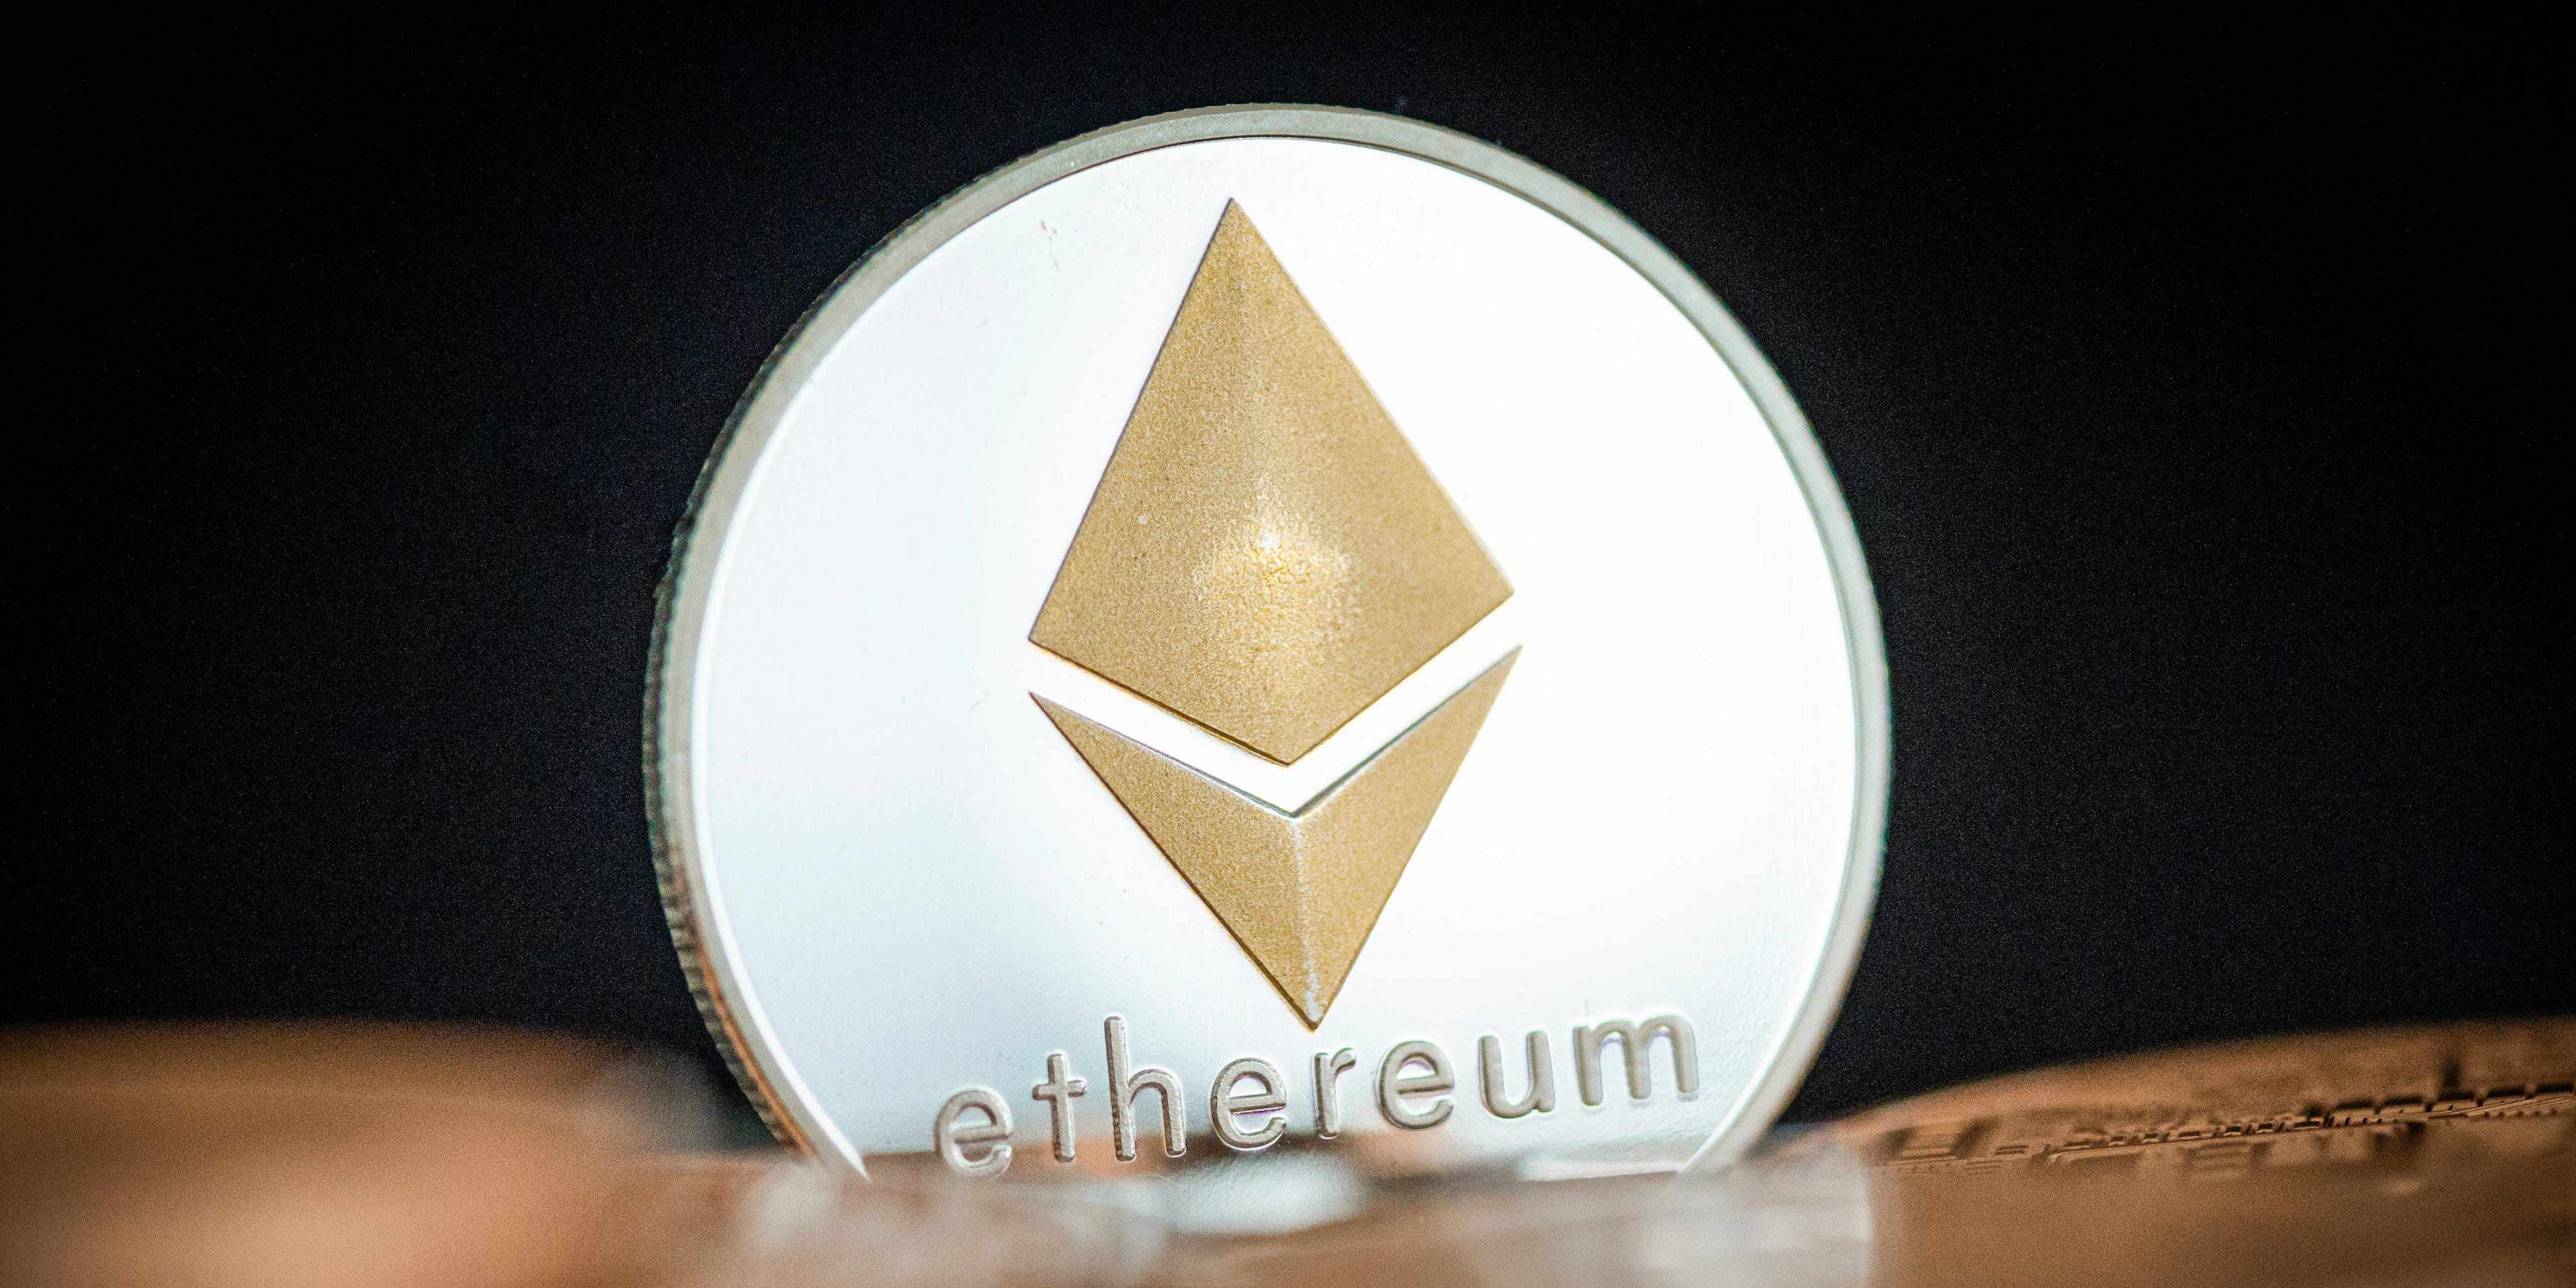 ethereum ether network explosive growth